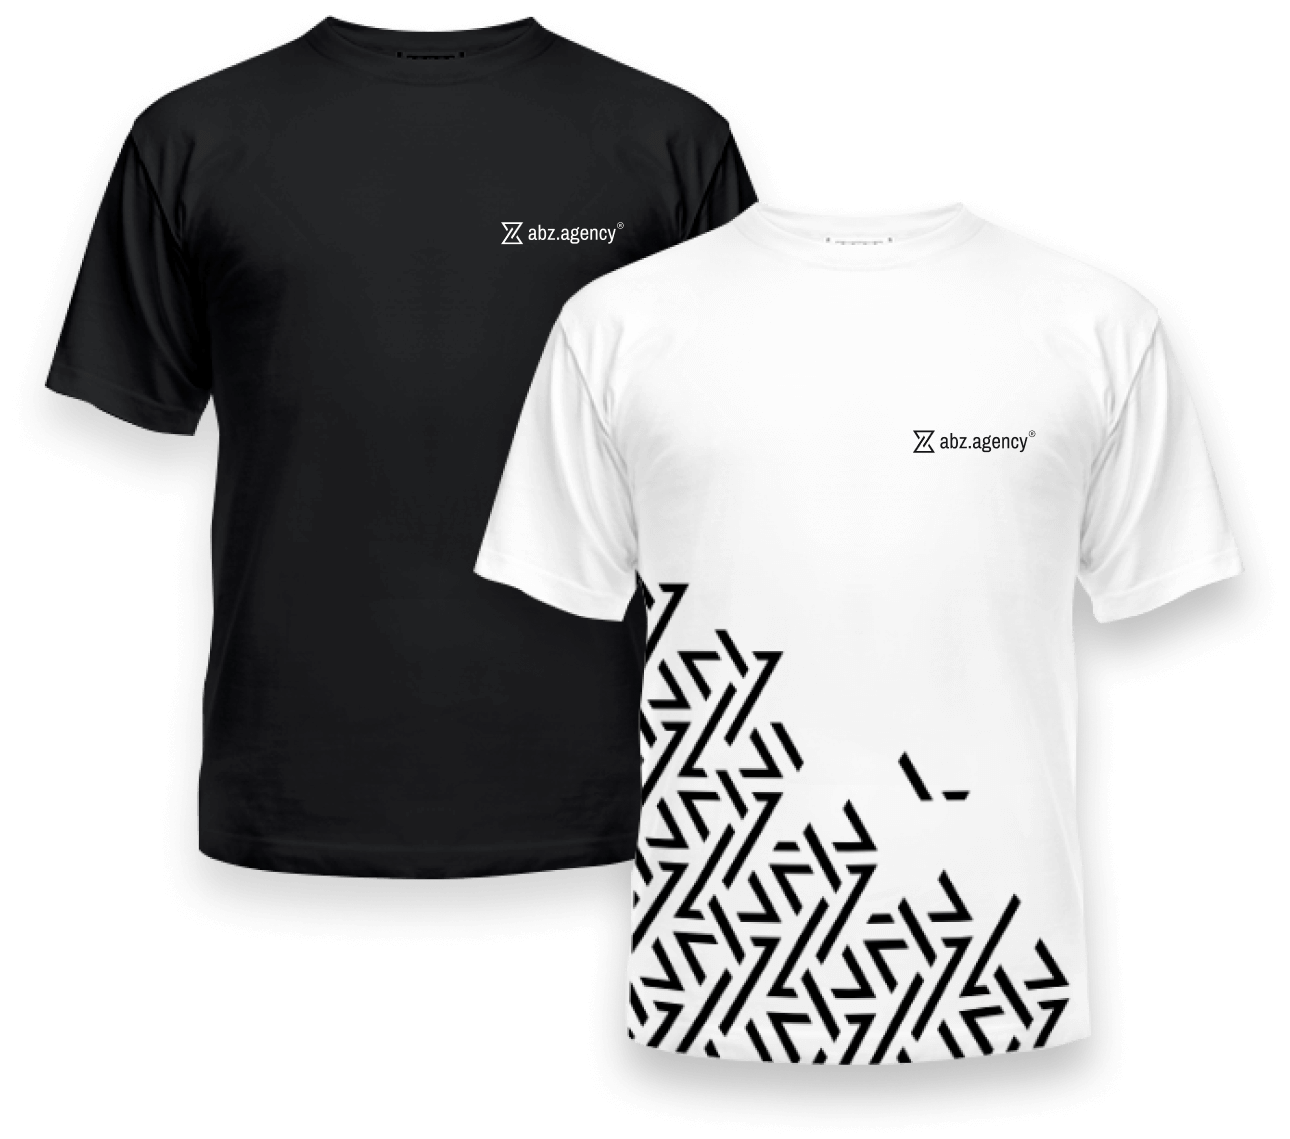 T-shirts Classic of abz.agency® with black and white variants